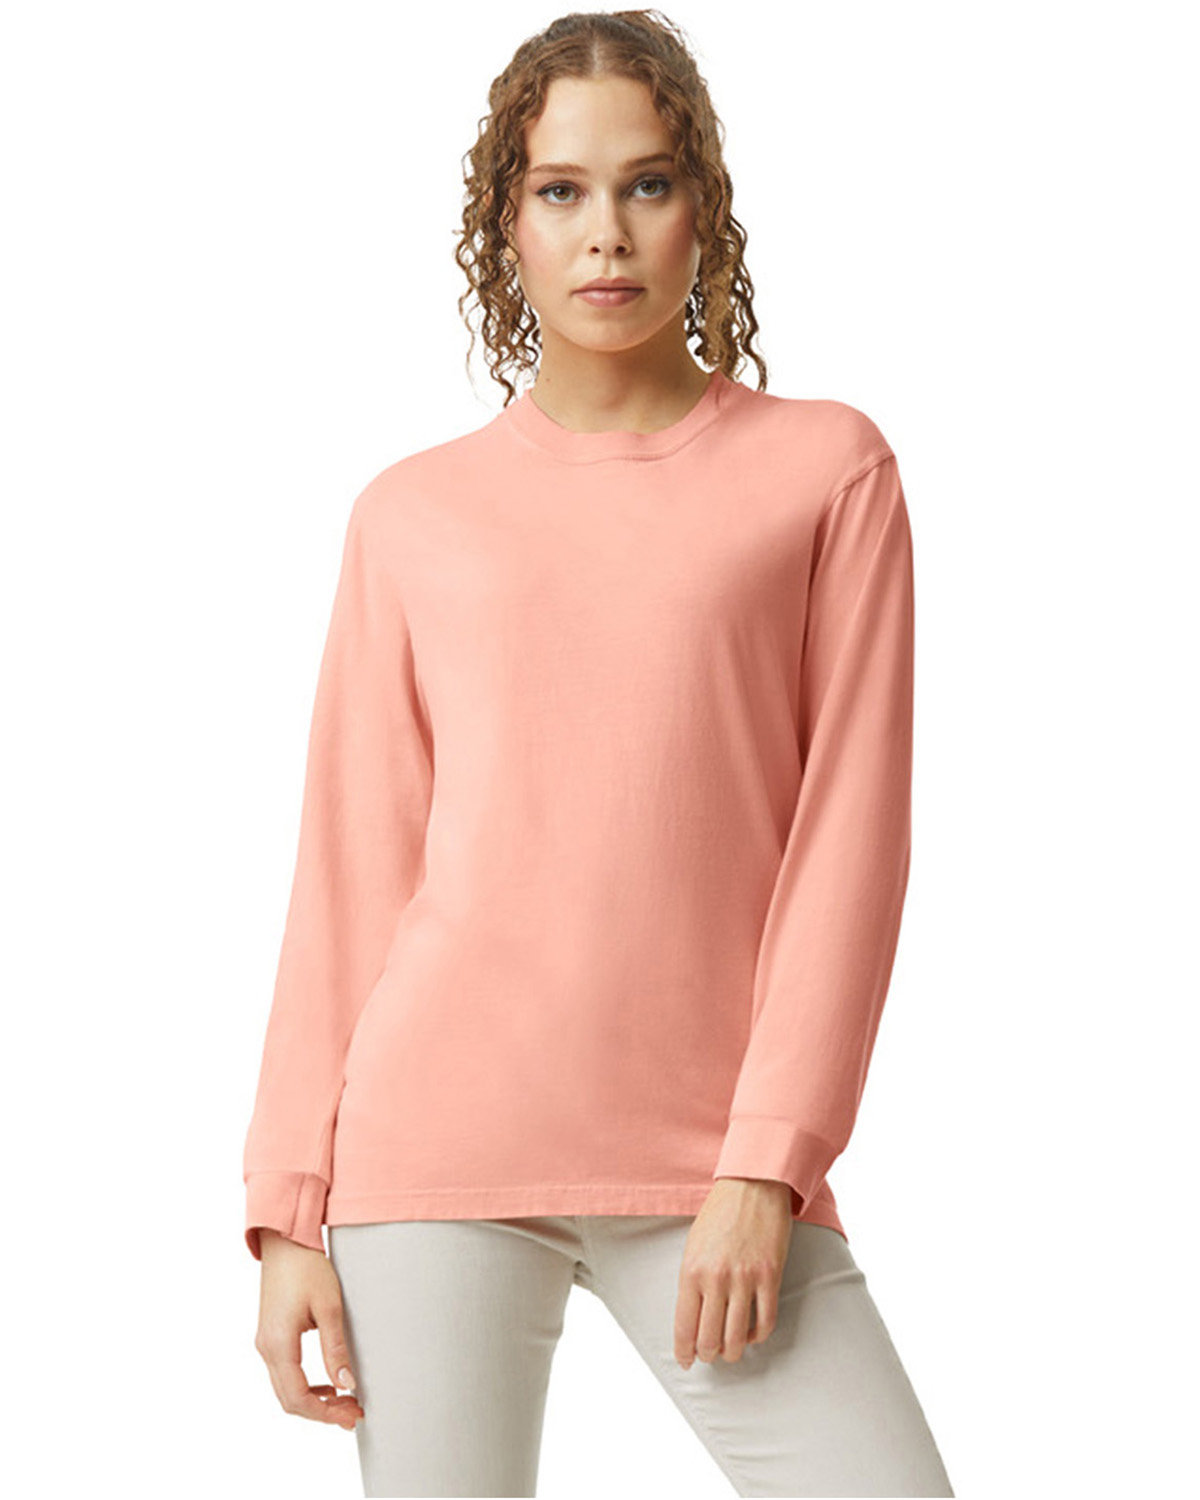 Comfort Colors Adult Heavyweight RS Long-Sleeve T-Shirt peachy 